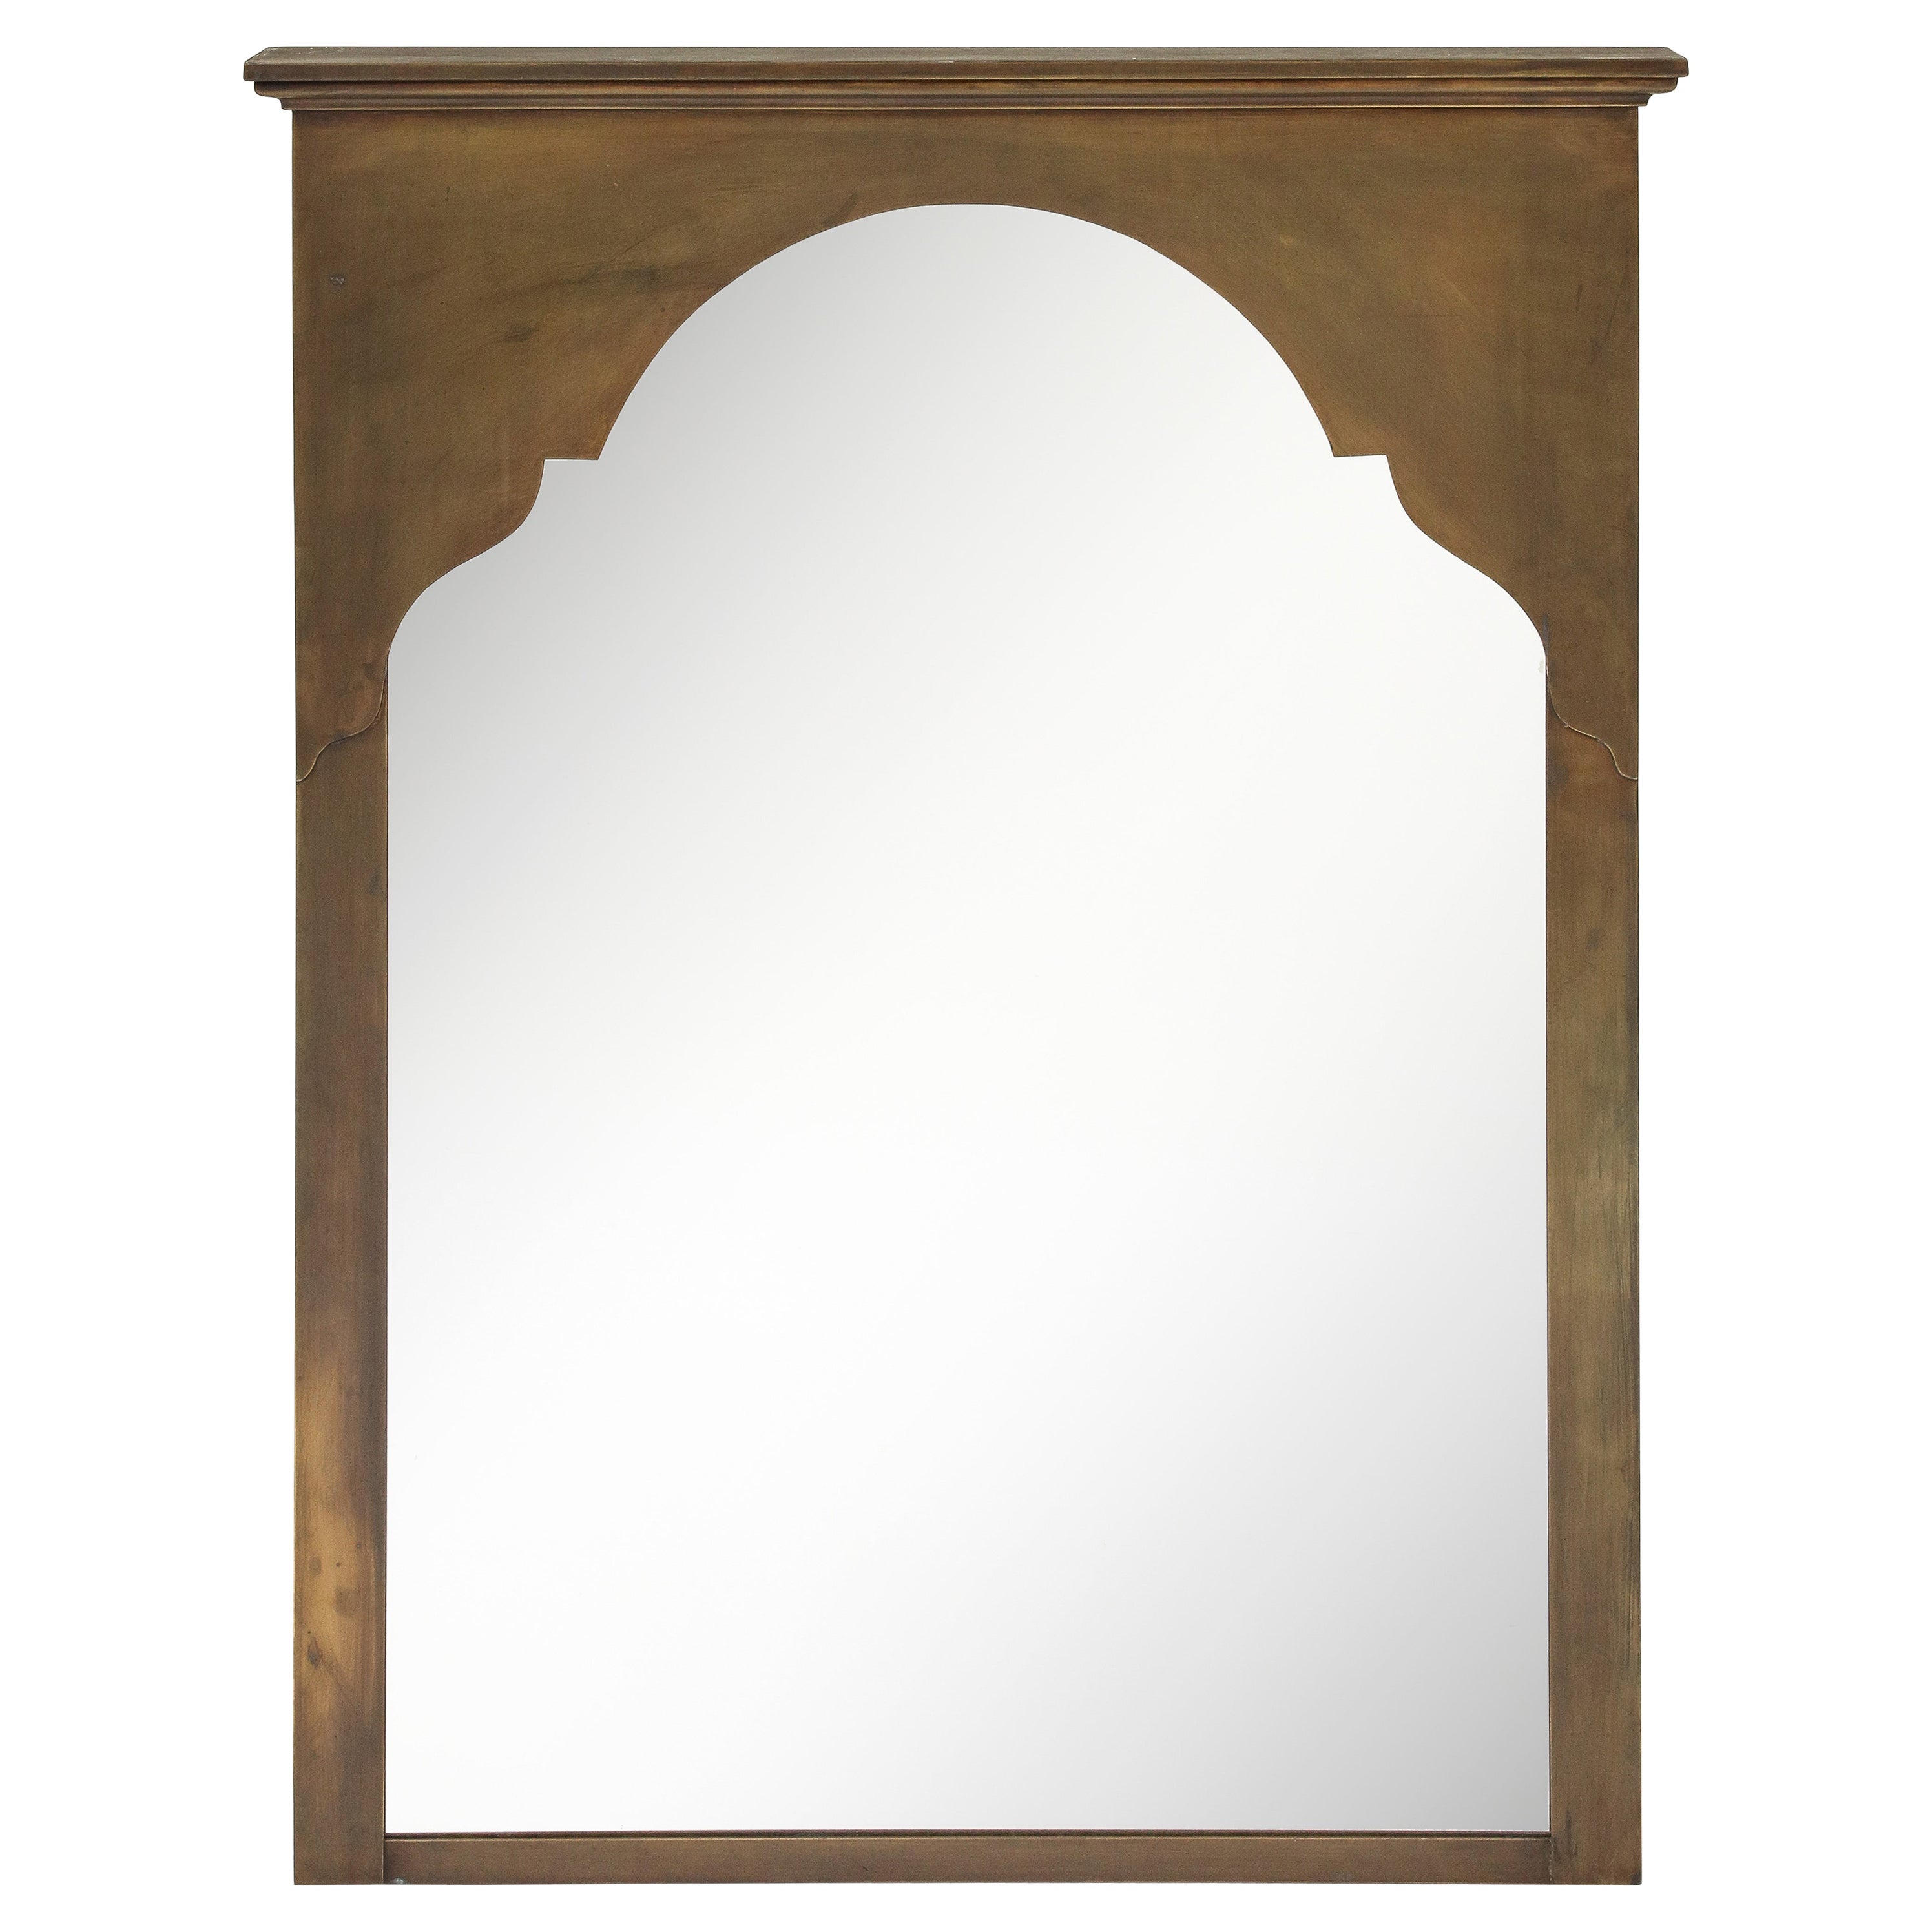 Midcentury Moroccan Style Brass Wall Mirror, 1960s